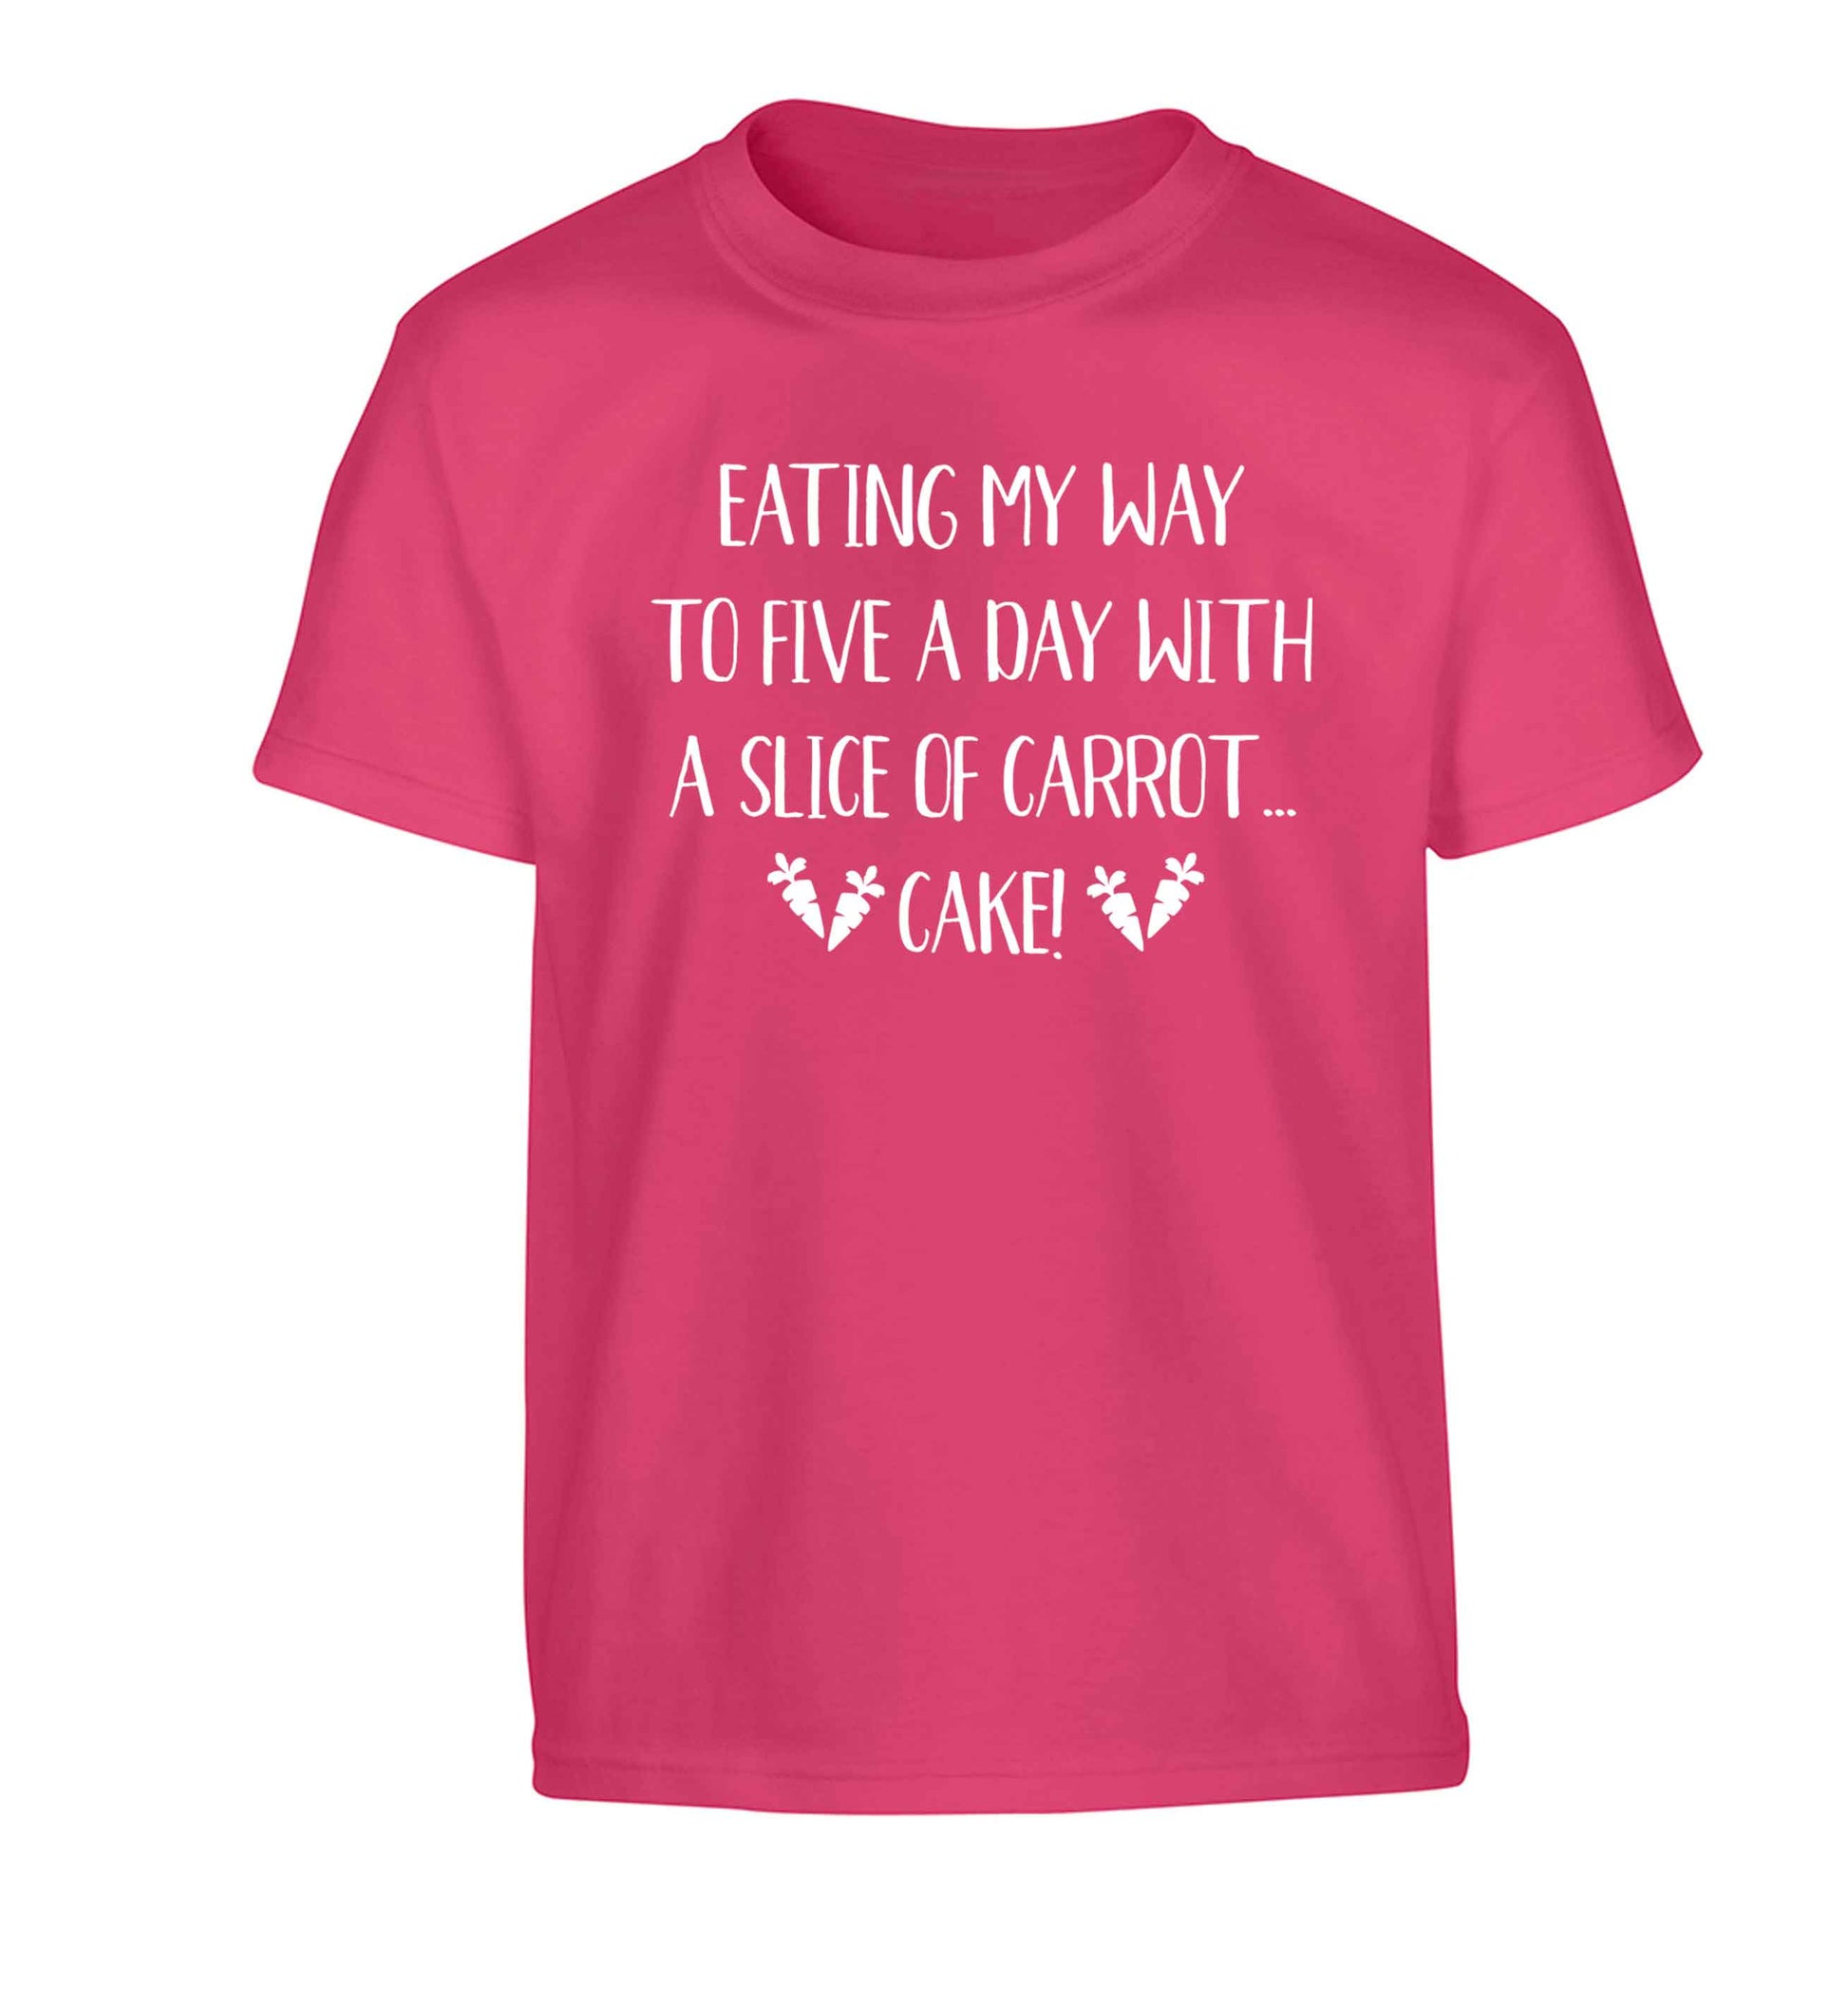 Eating my way to five a day with a slice of carrot cake day Children's pink Tshirt 12-13 Years